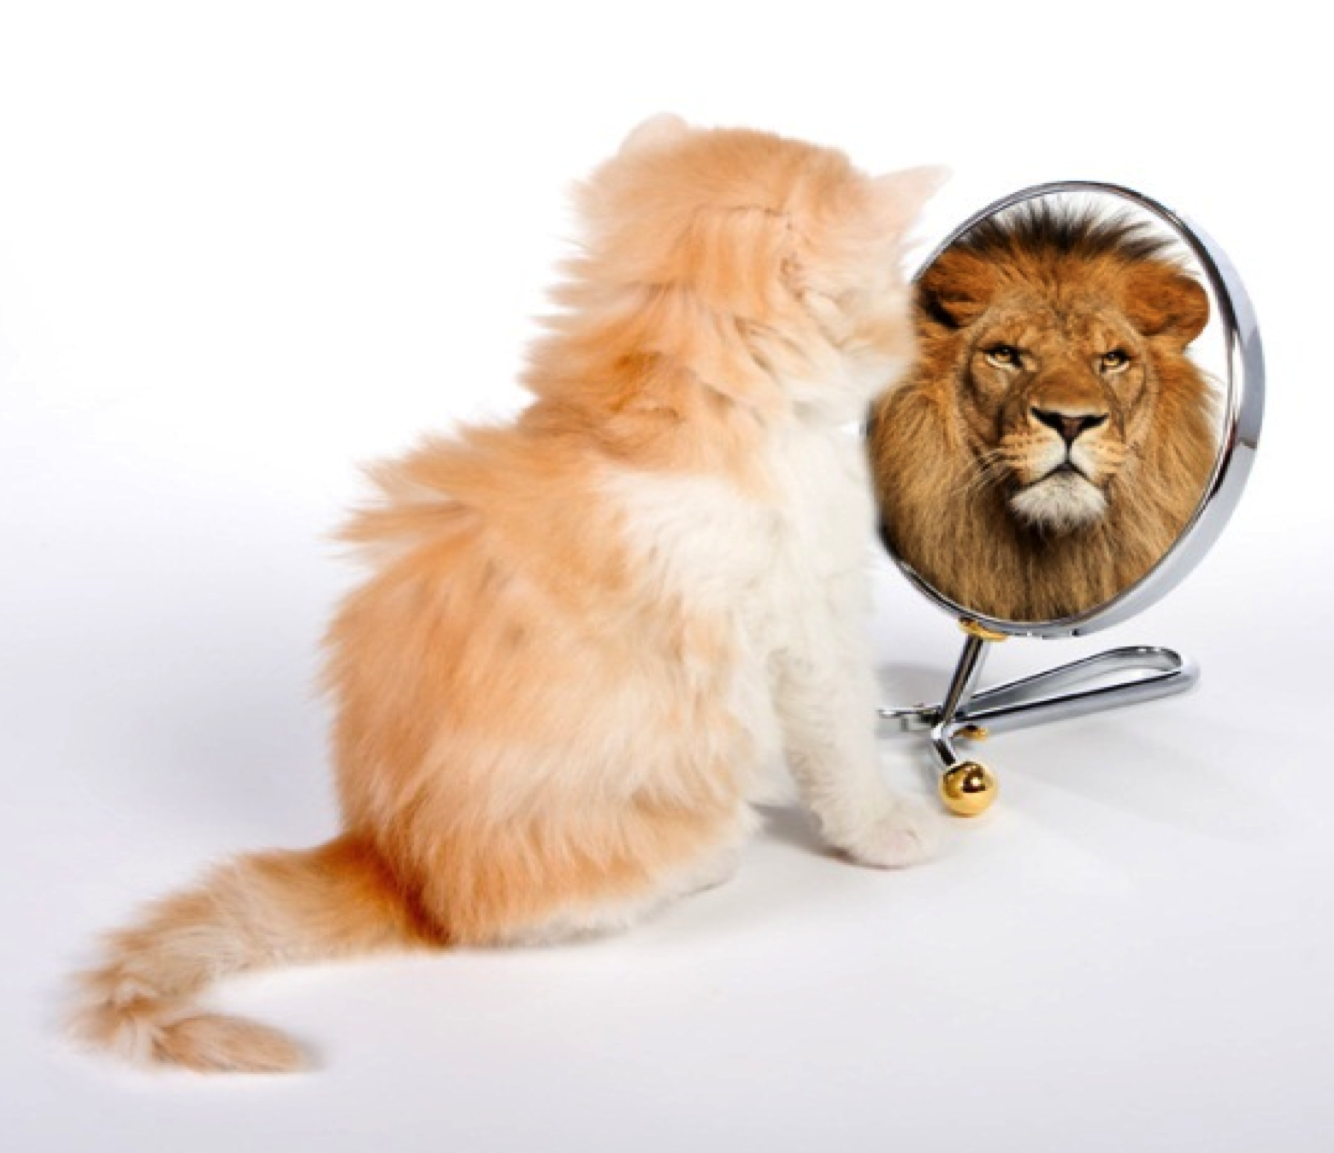 A ginger kitten looks into a round mirror and sees a lions face